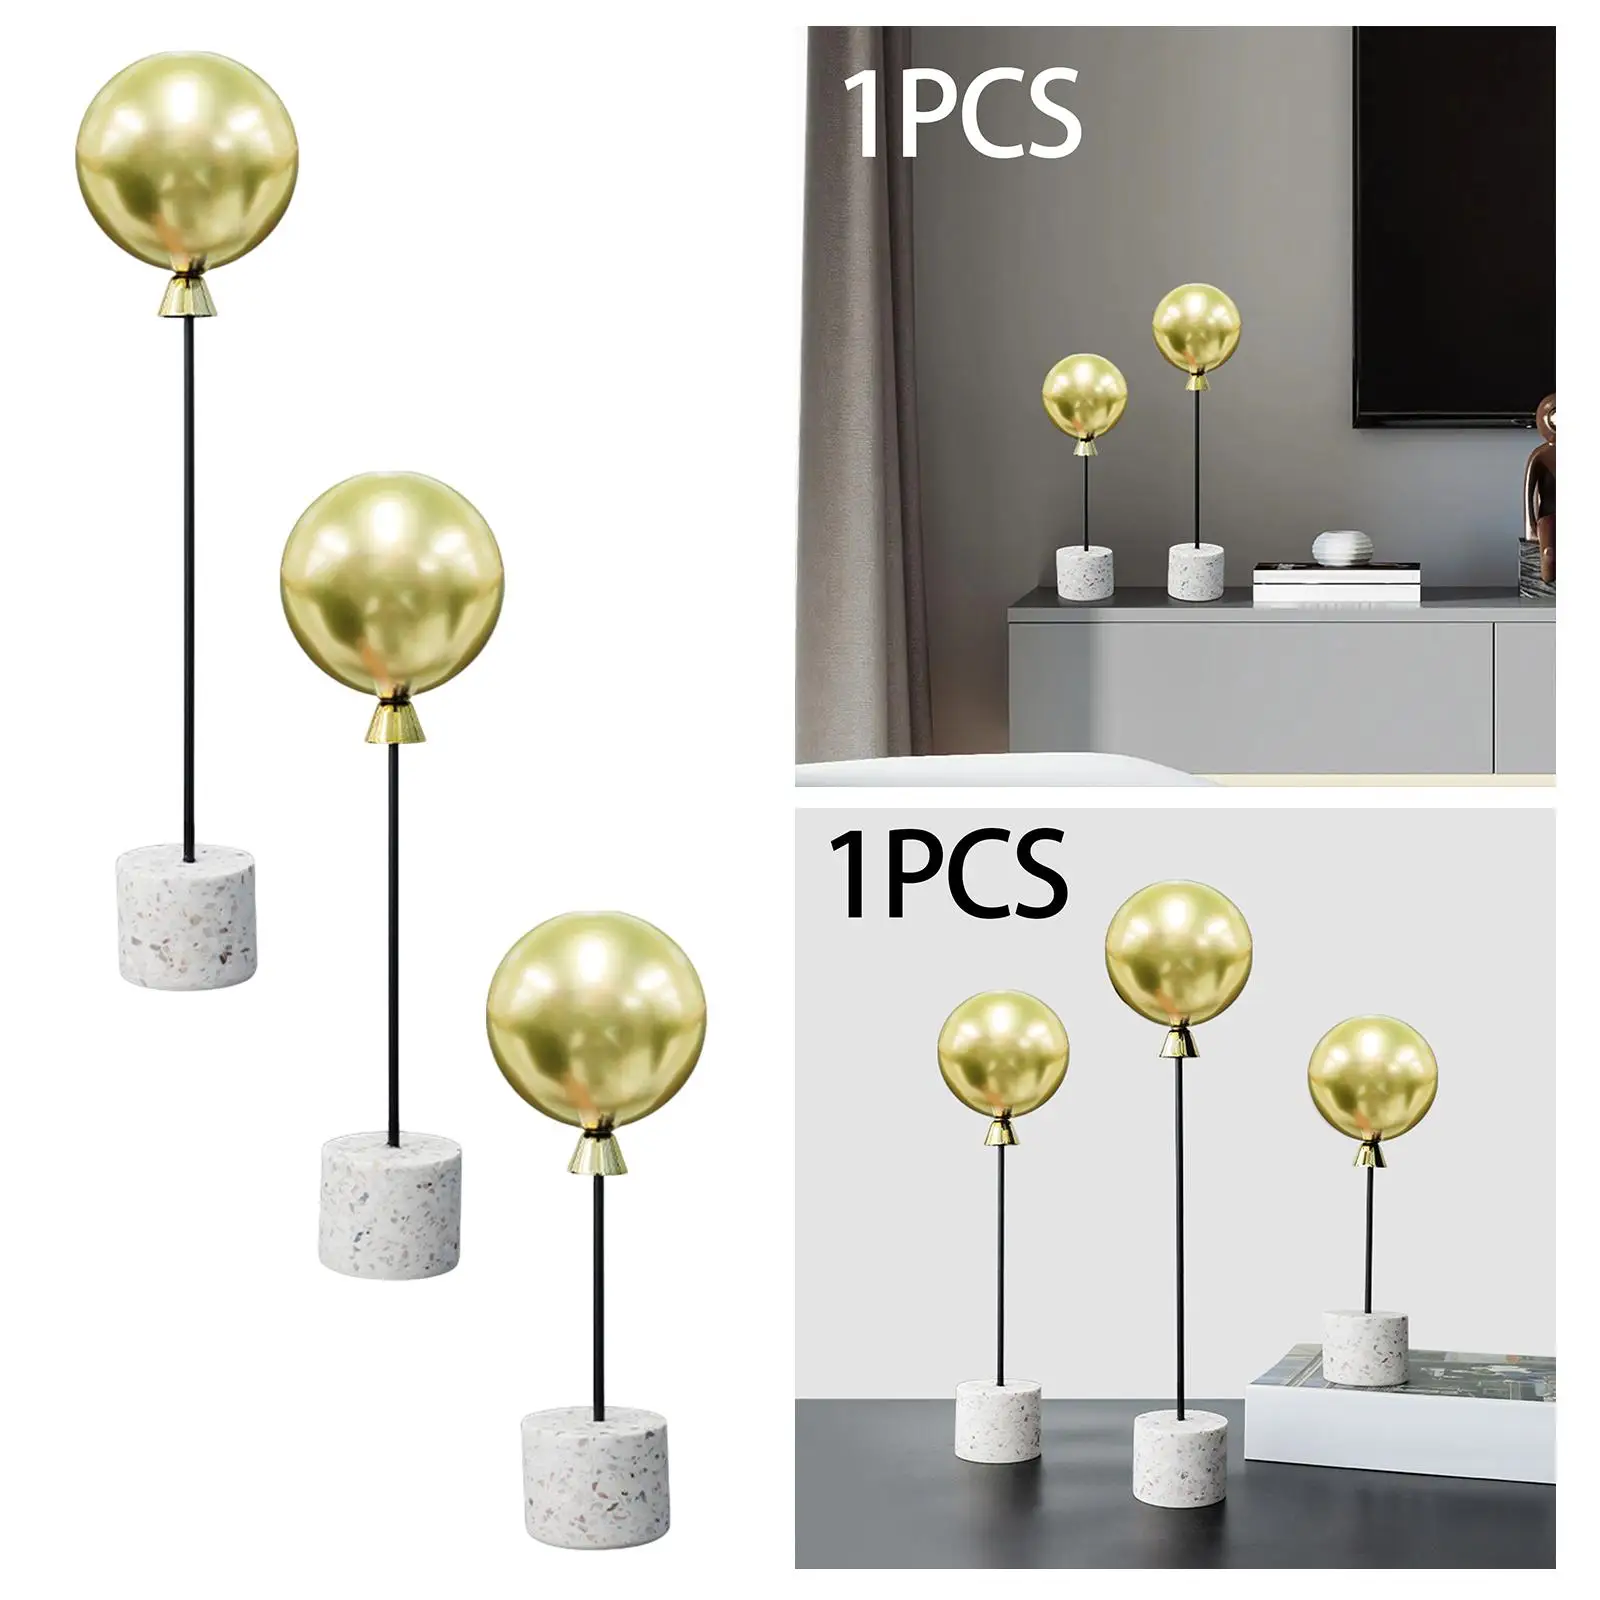 Metal Balloon Decorations with Base Gifts Simple European Style Balloon Model for Home Office Decor Desktop Living Room Bar Cafe